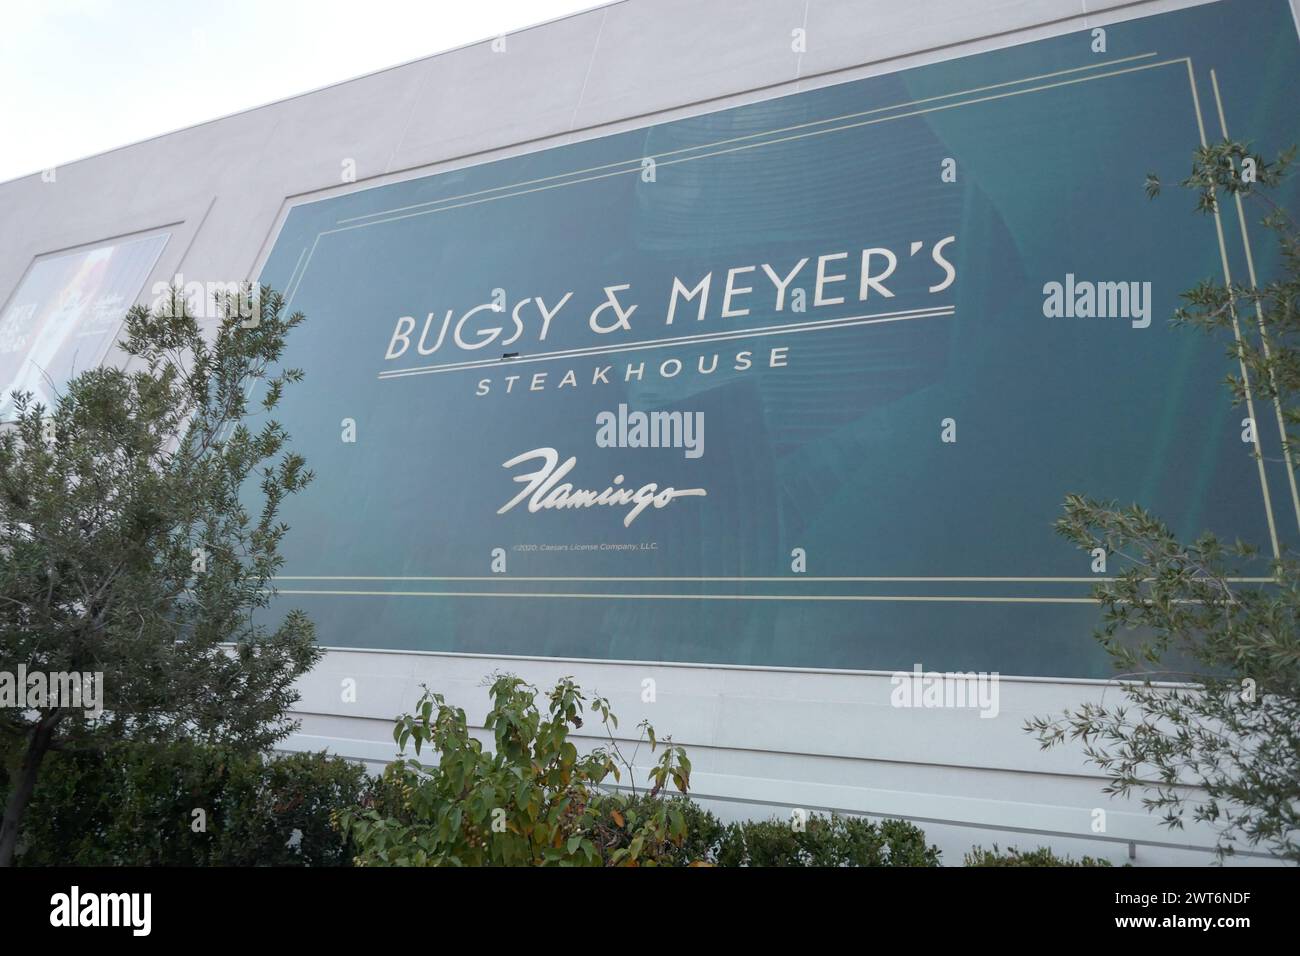 Las Vegas, Nevada, USA 7th March 2024 Busy & Meyers Steakhouse The Flamingo Billboard on March 7, 2024 in Las Vegas, Nevada, USA. Photo by Barry King/Alamy Stock Photo Stock Photo